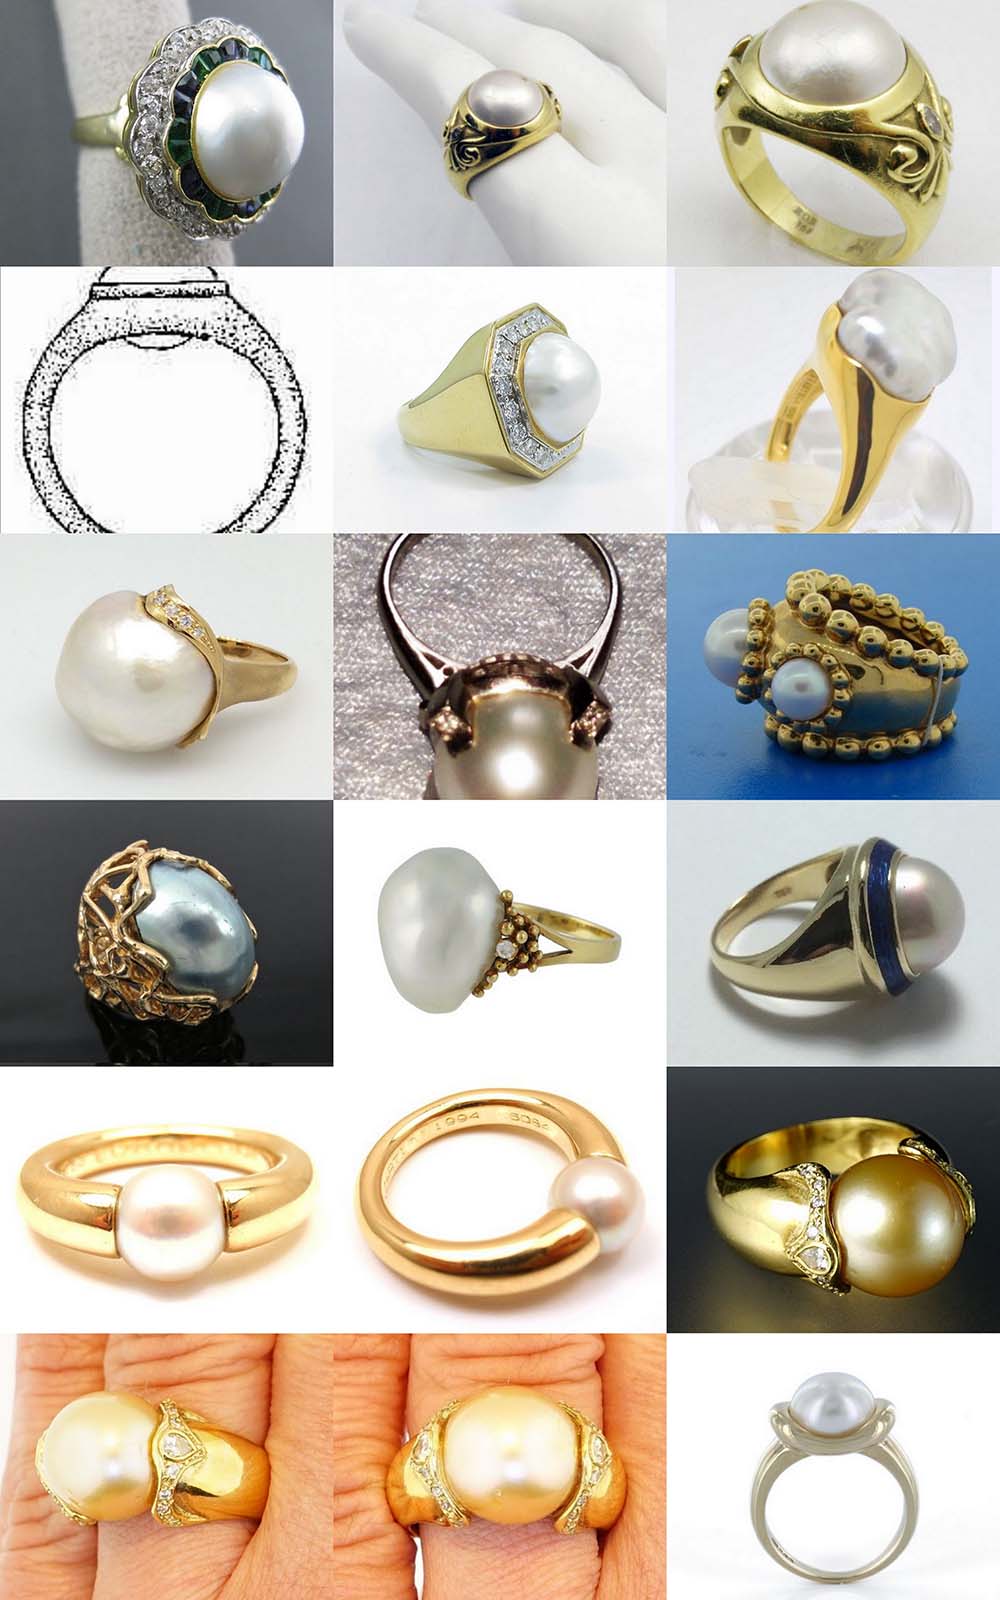 Astrogems can make jyotish pearl rings in any style.